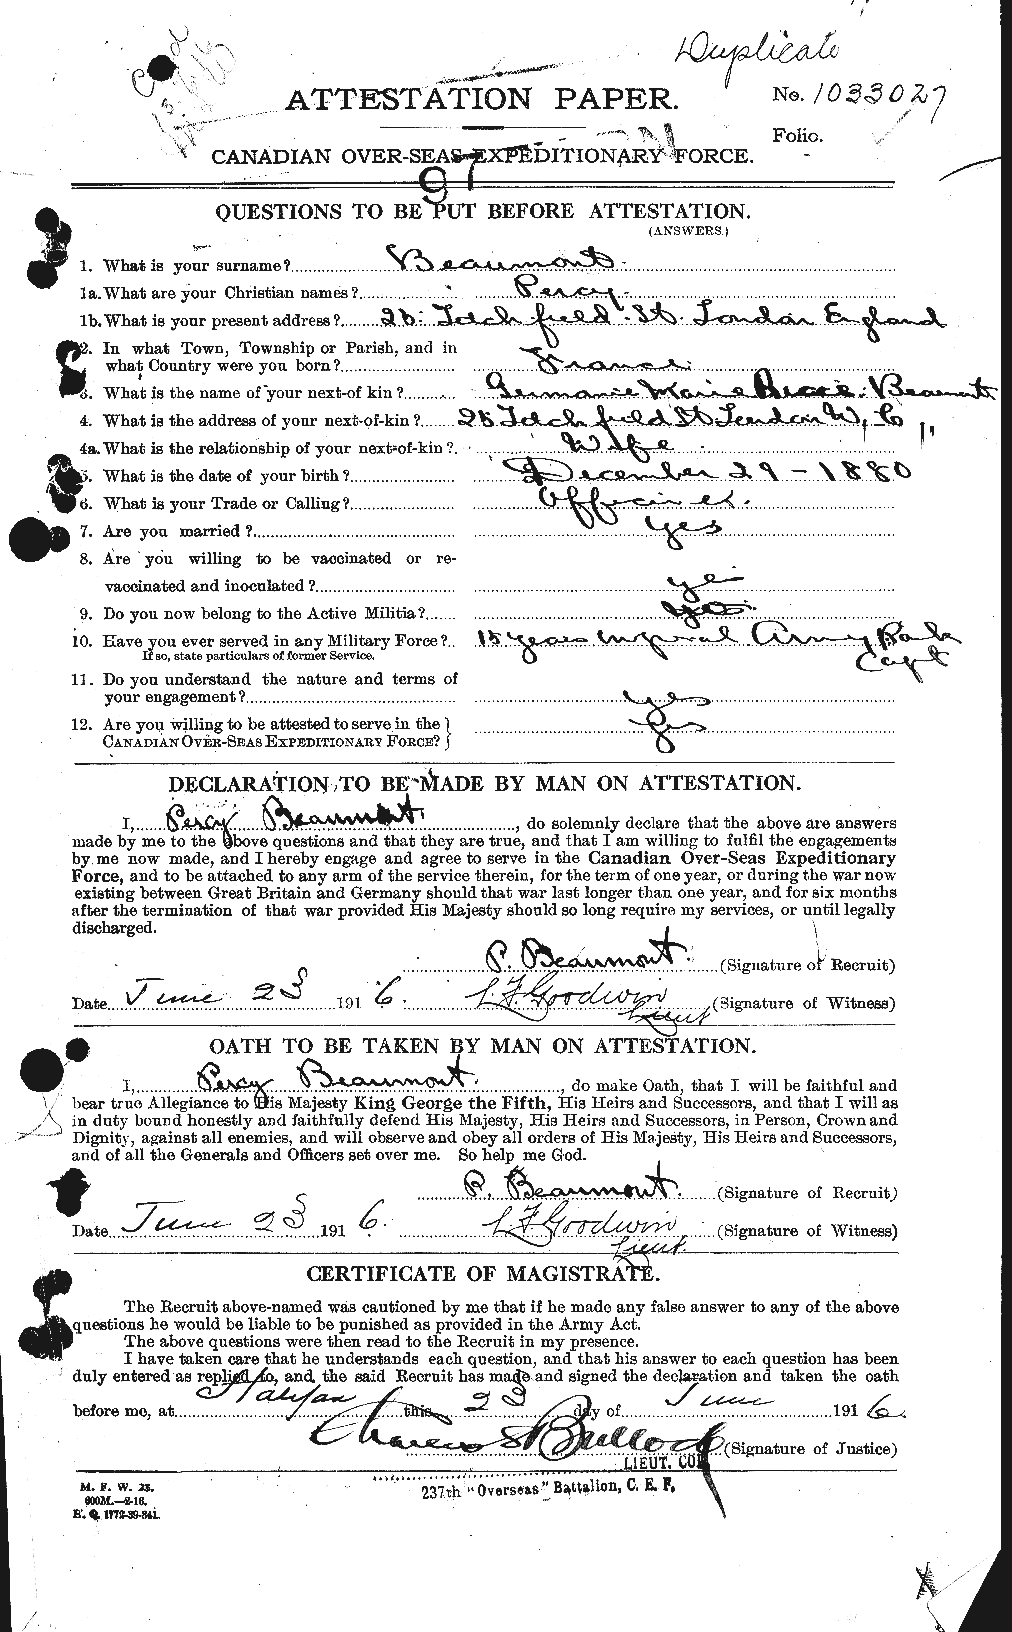 Personnel Records of the First World War - CEF 231704a